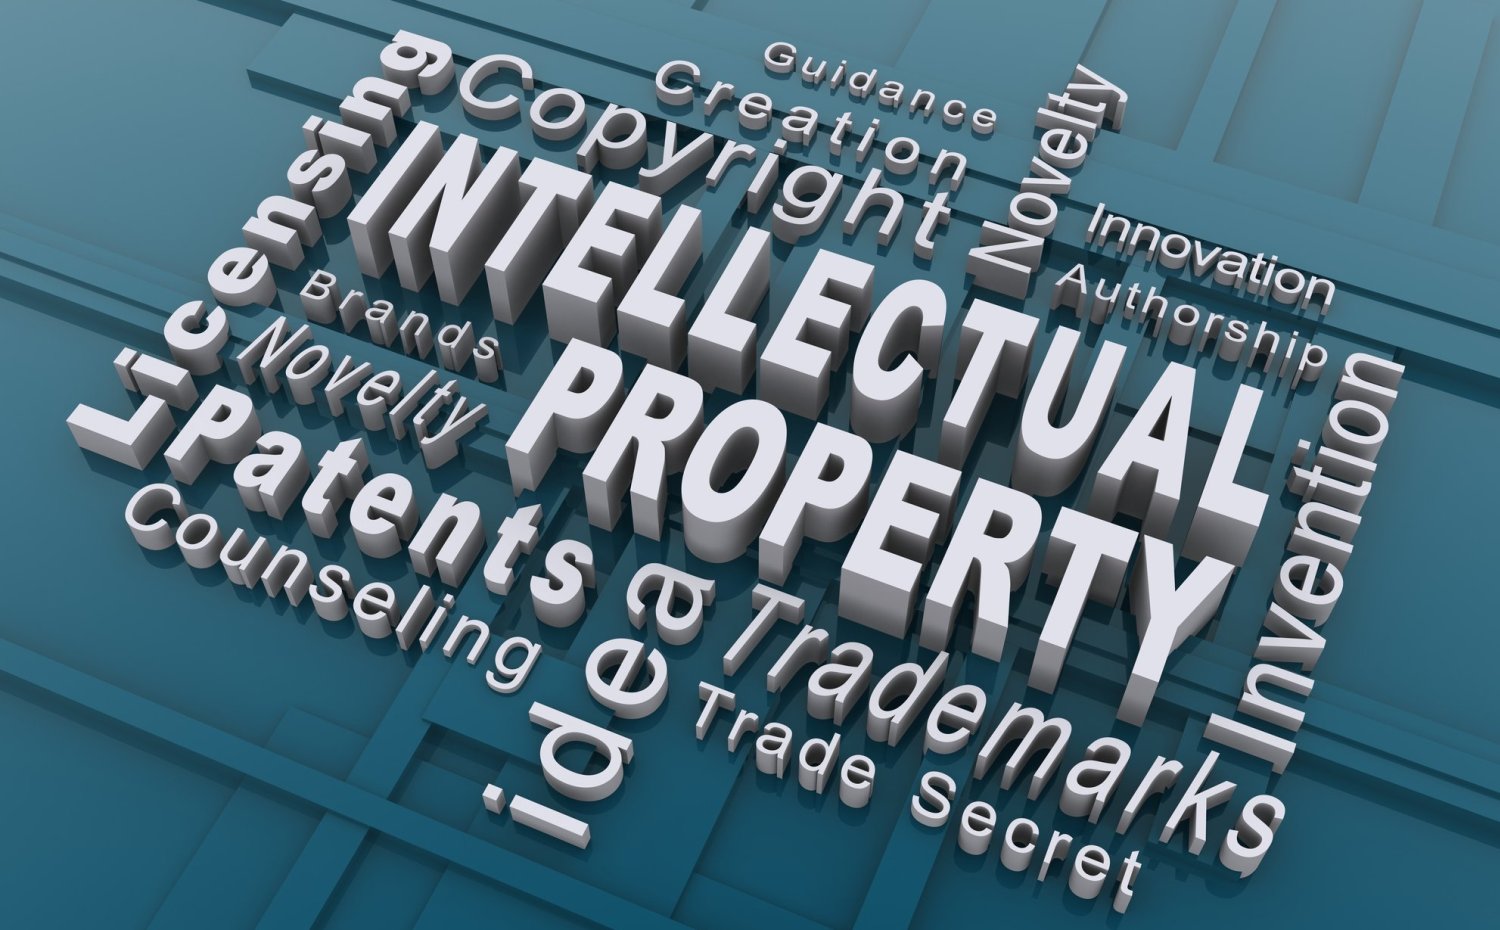 Introduction to IP